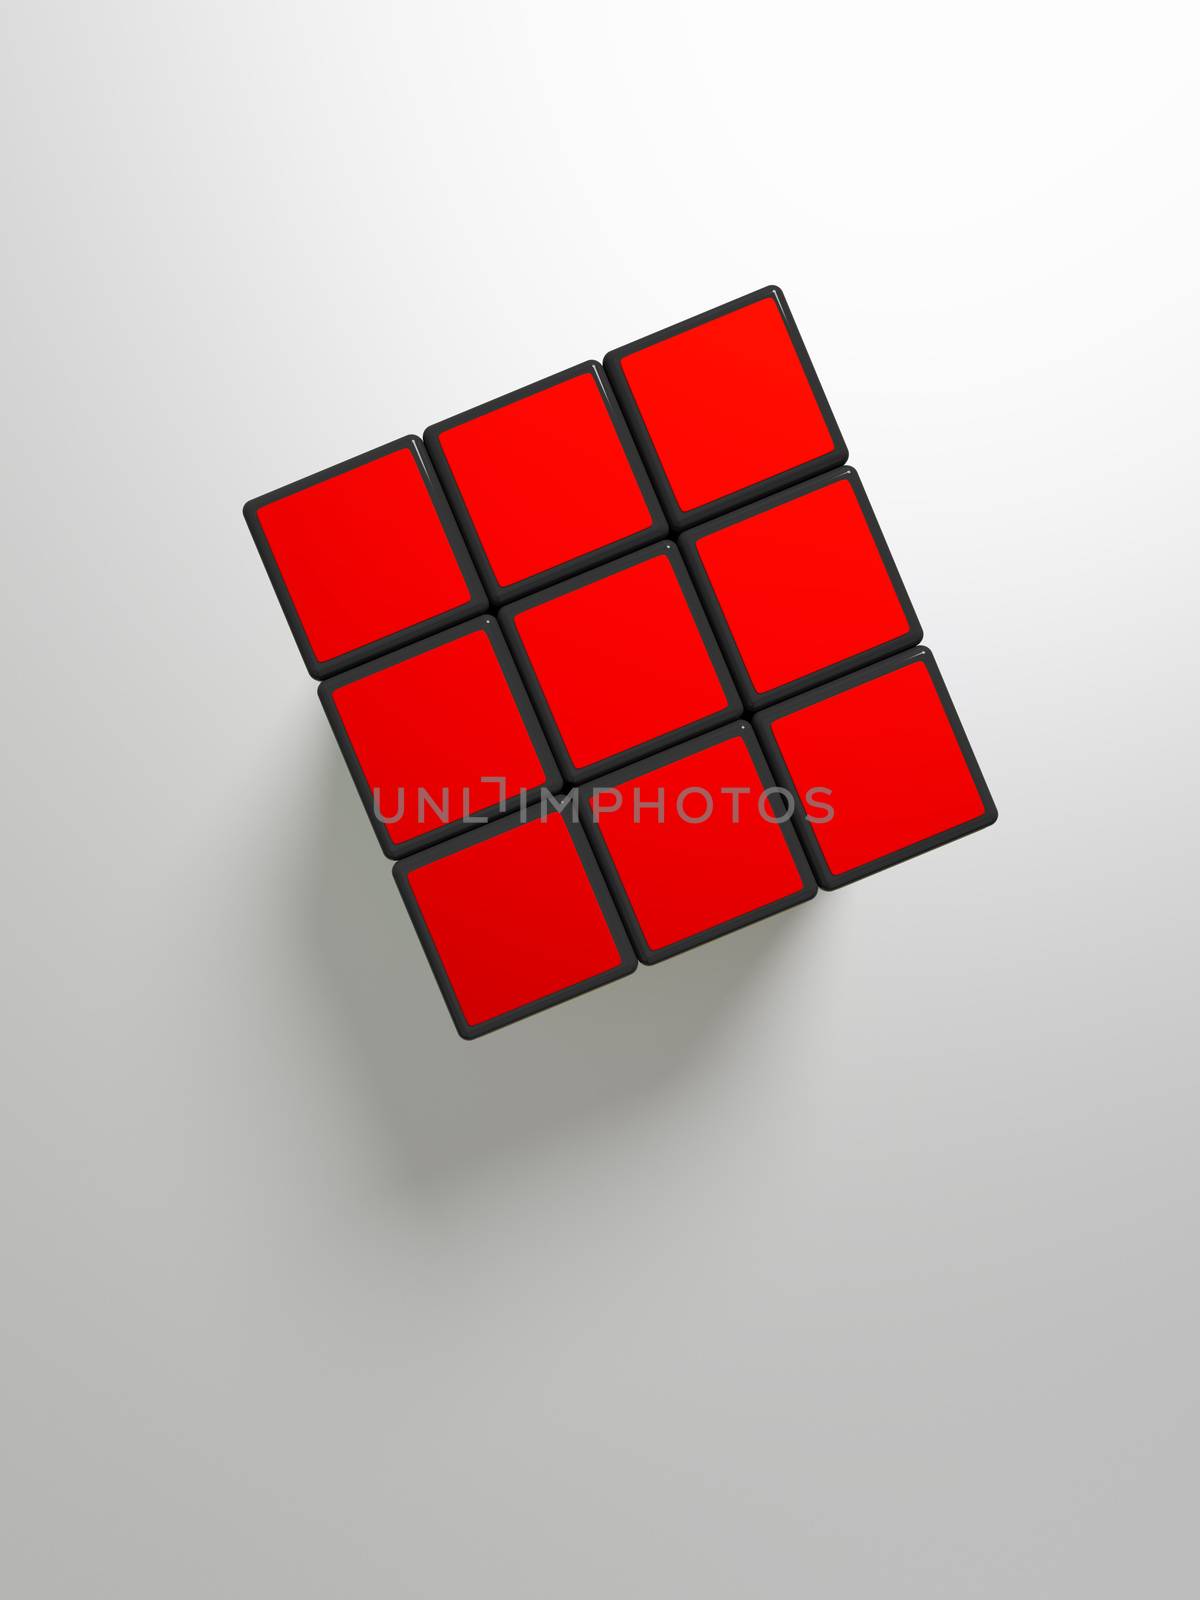 Sindelfingen, Germany, July 4th 2019. Editorial 3D illustration. Rubik's Cube is a 3D combination puzzle invented in 1974 by Hungarian Erno Rubik.